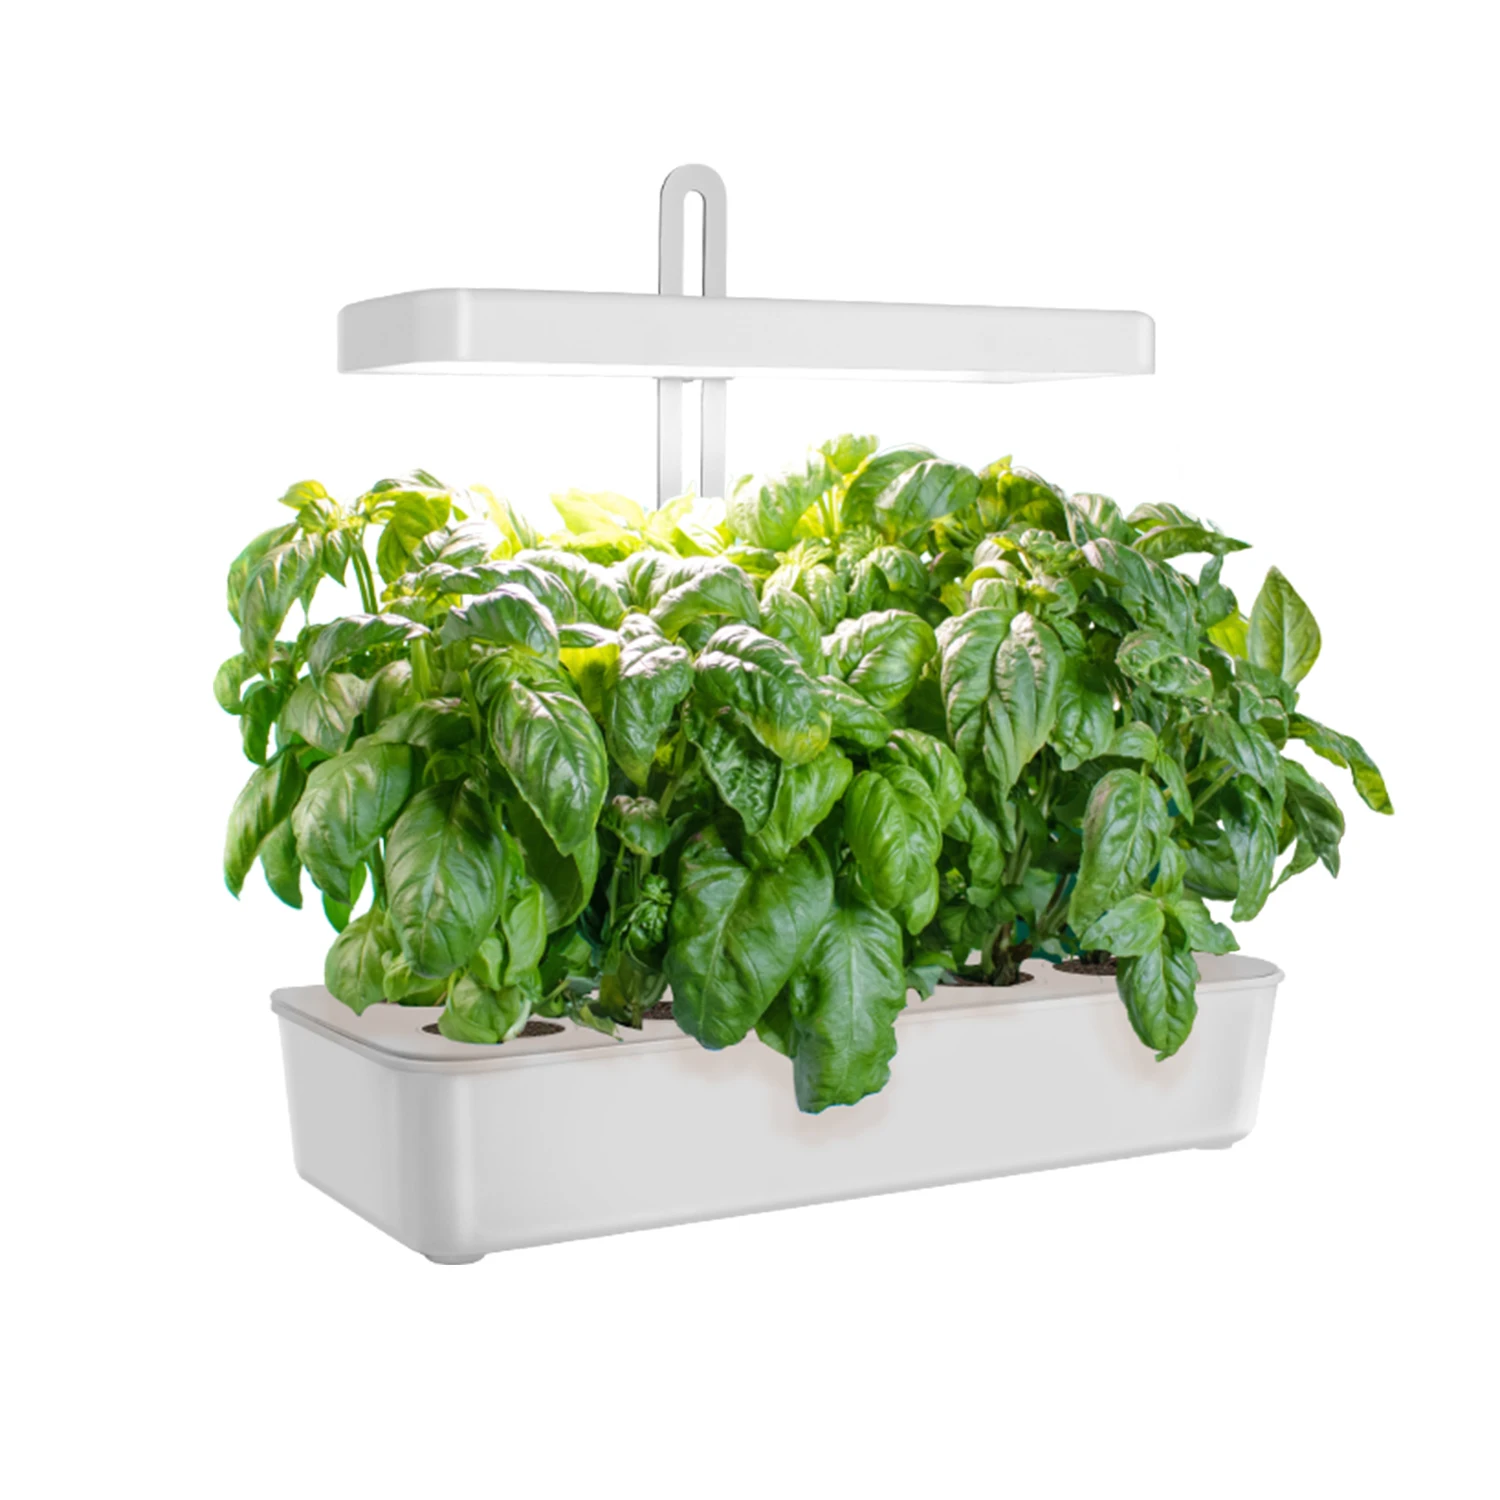 

LED hydroponic growing system ideal for plant grow Indoor led grow light mini herb garden kit indoor smart garden microgreens, White